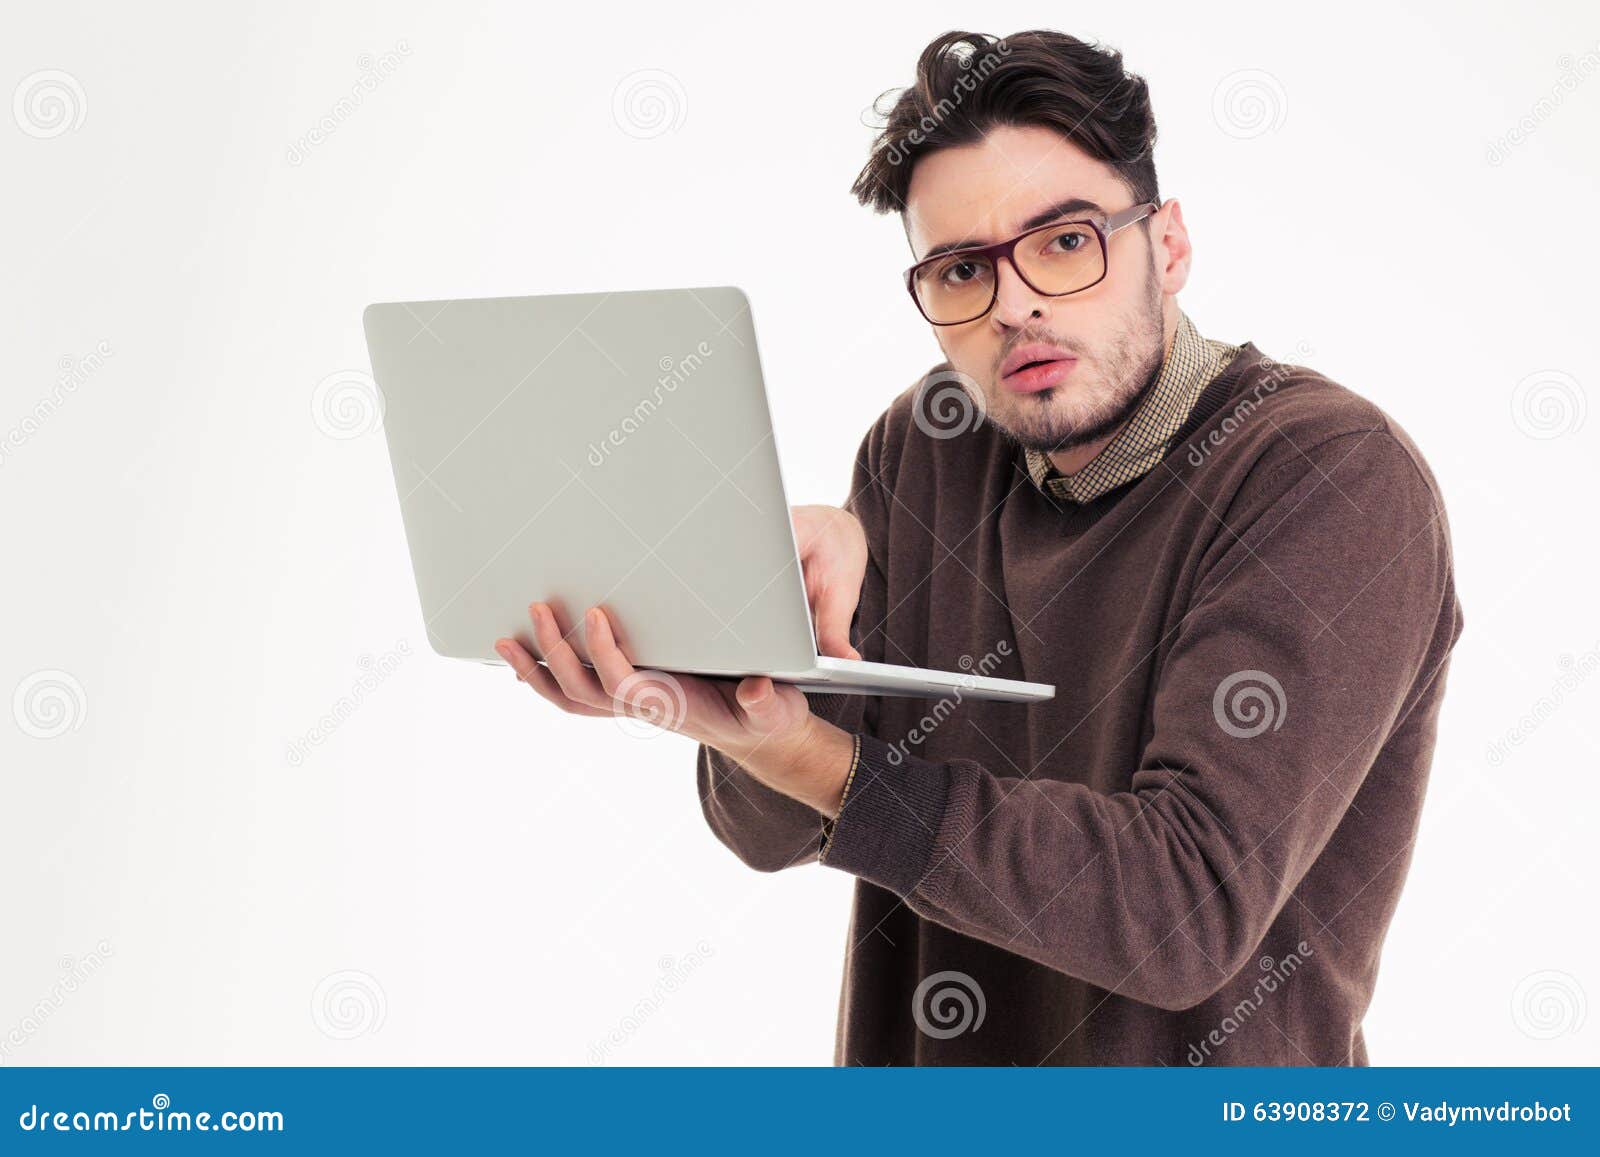 portrait of a funny man using laptop compter